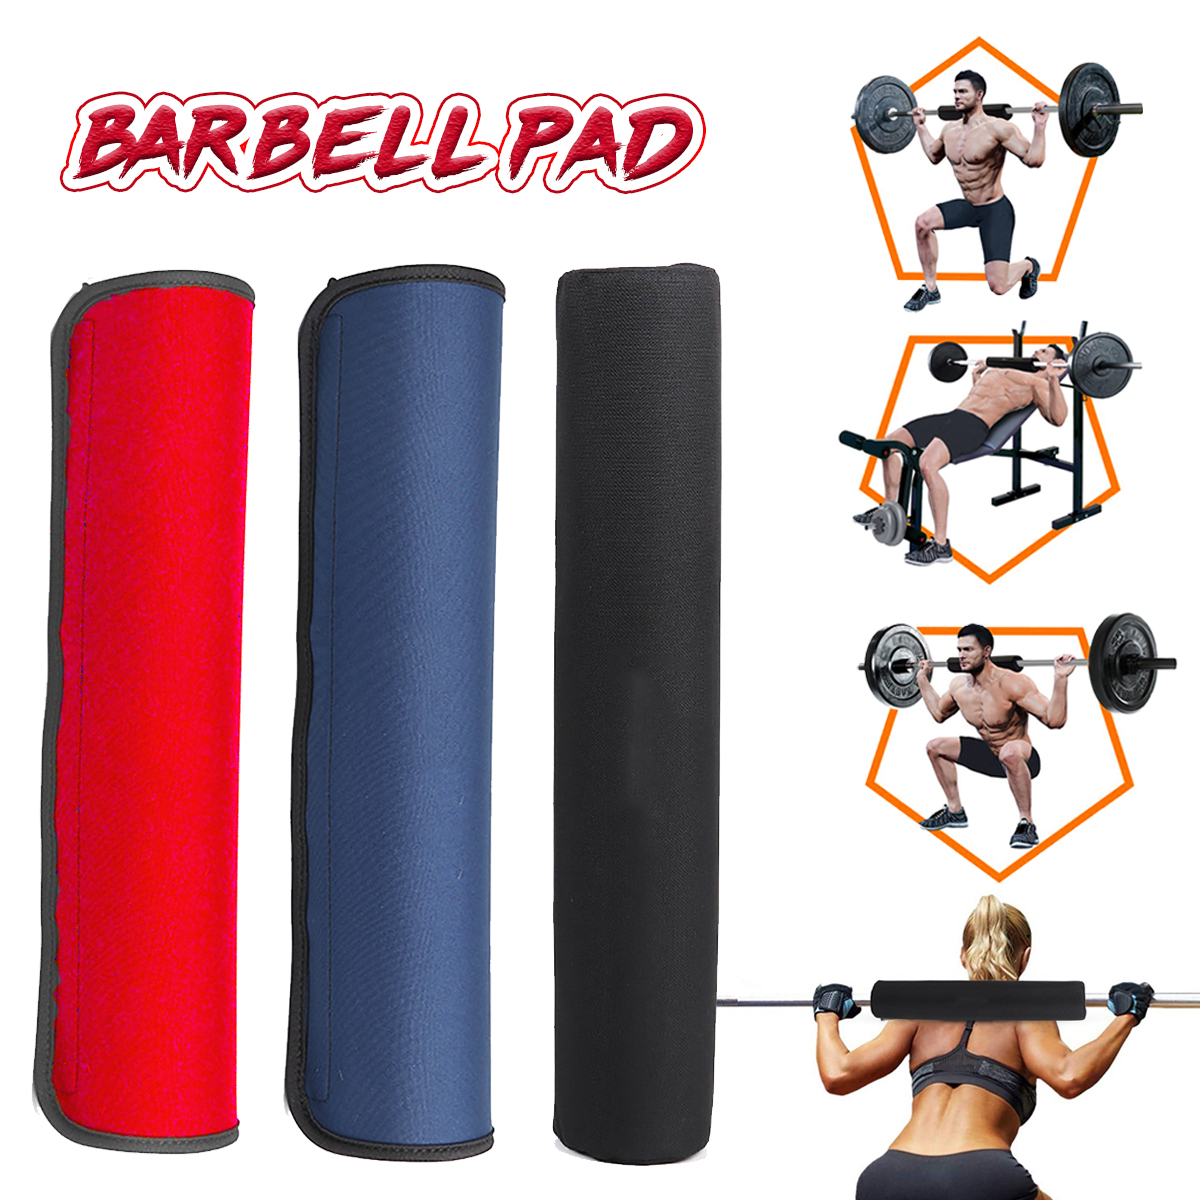 Protective-Shoulder-Pads-Support-Gym-Weightlifting-Squat-Fitness-Bar-Barbell-Pad-1689343-3